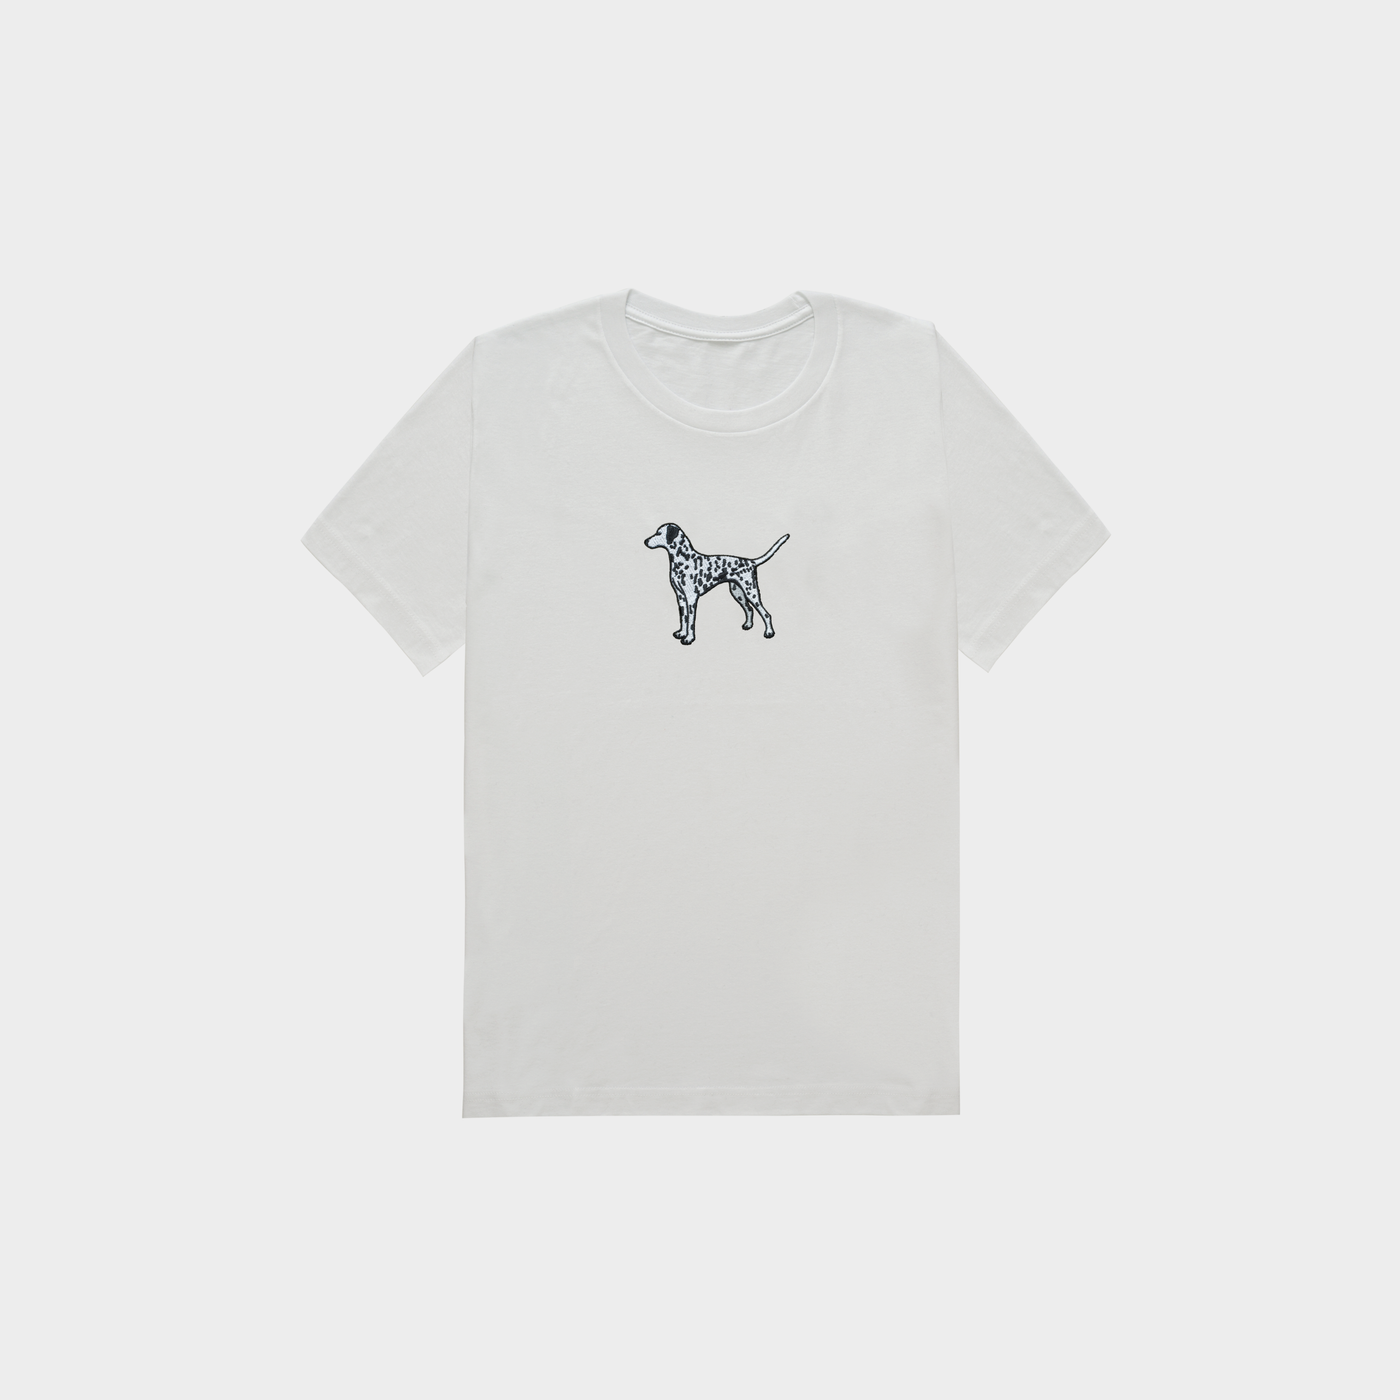 Bobby's Planet Kids Embroidered Dalmatian T-Shirt from Paws Dog Cat Animals Collection in White Color#color_white